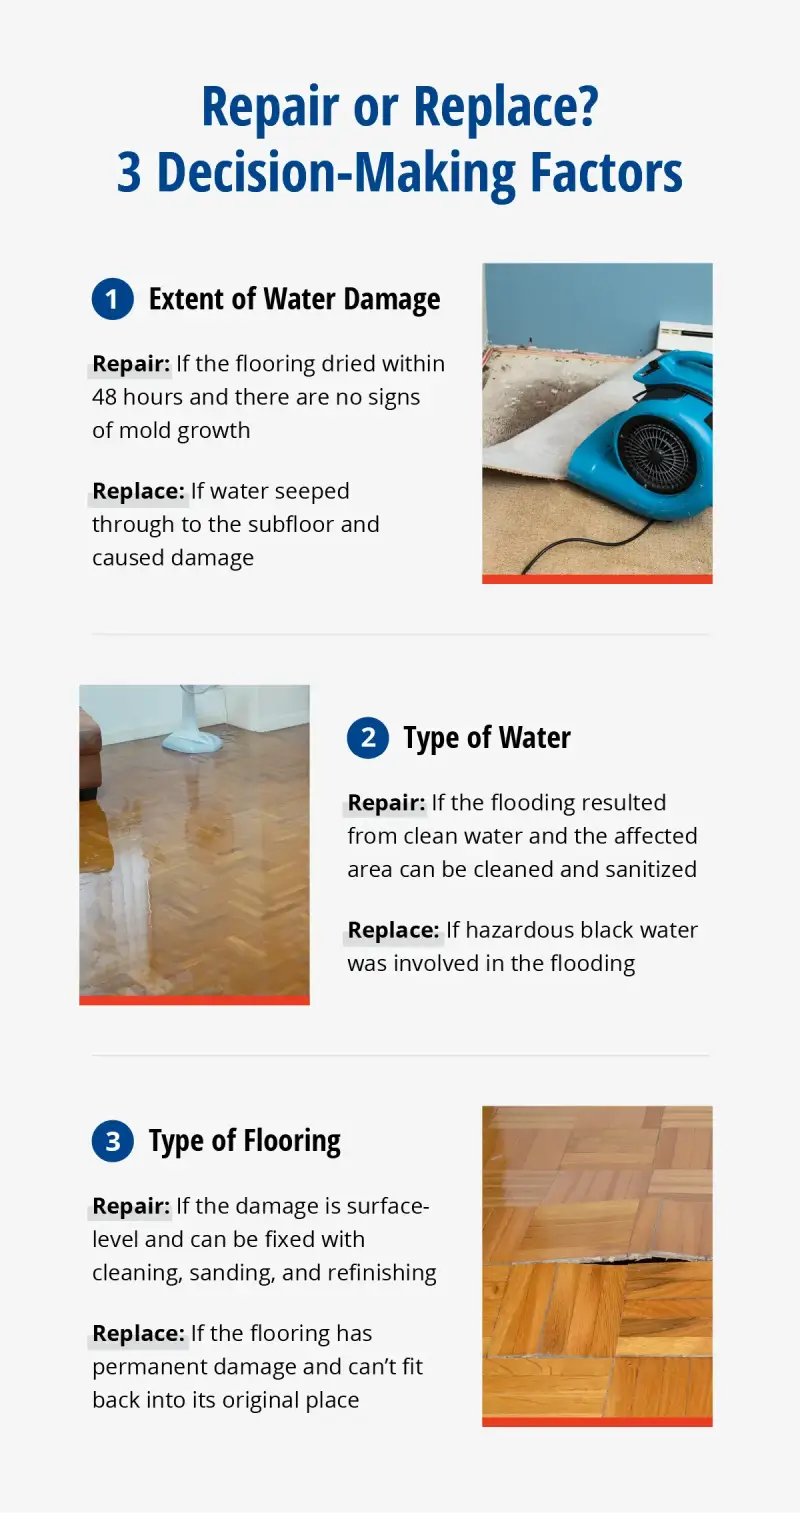 An image explaining whether you should replace or repair water damaged floors based on the extent of the water damage, type of water, and type of flooring.